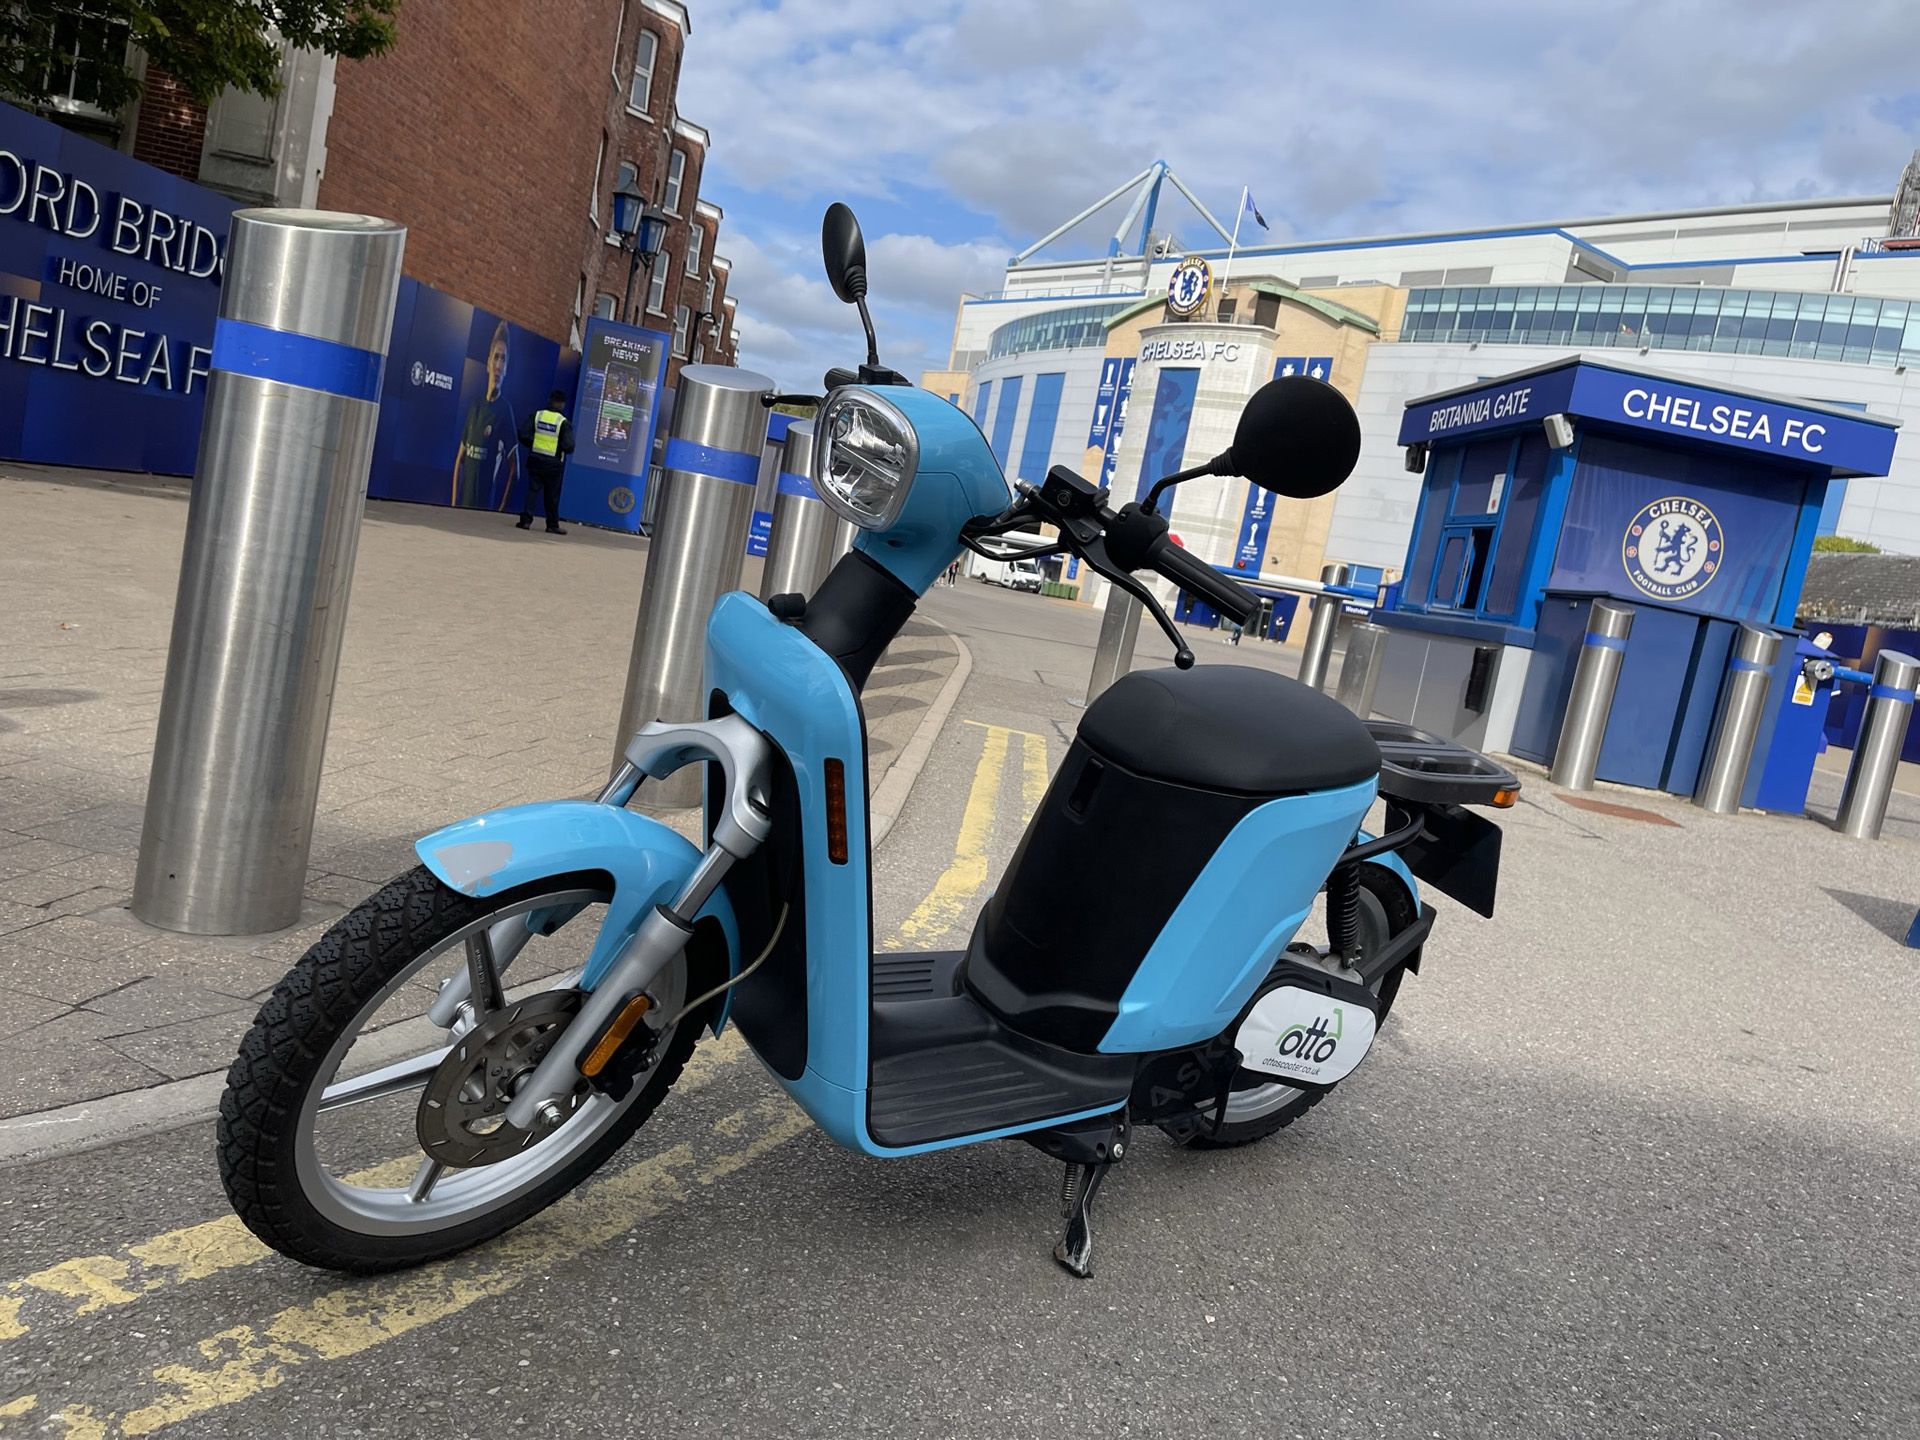 Askoll eSpro 70 at Chelsea FC Stamford Bridge, electric scooter review